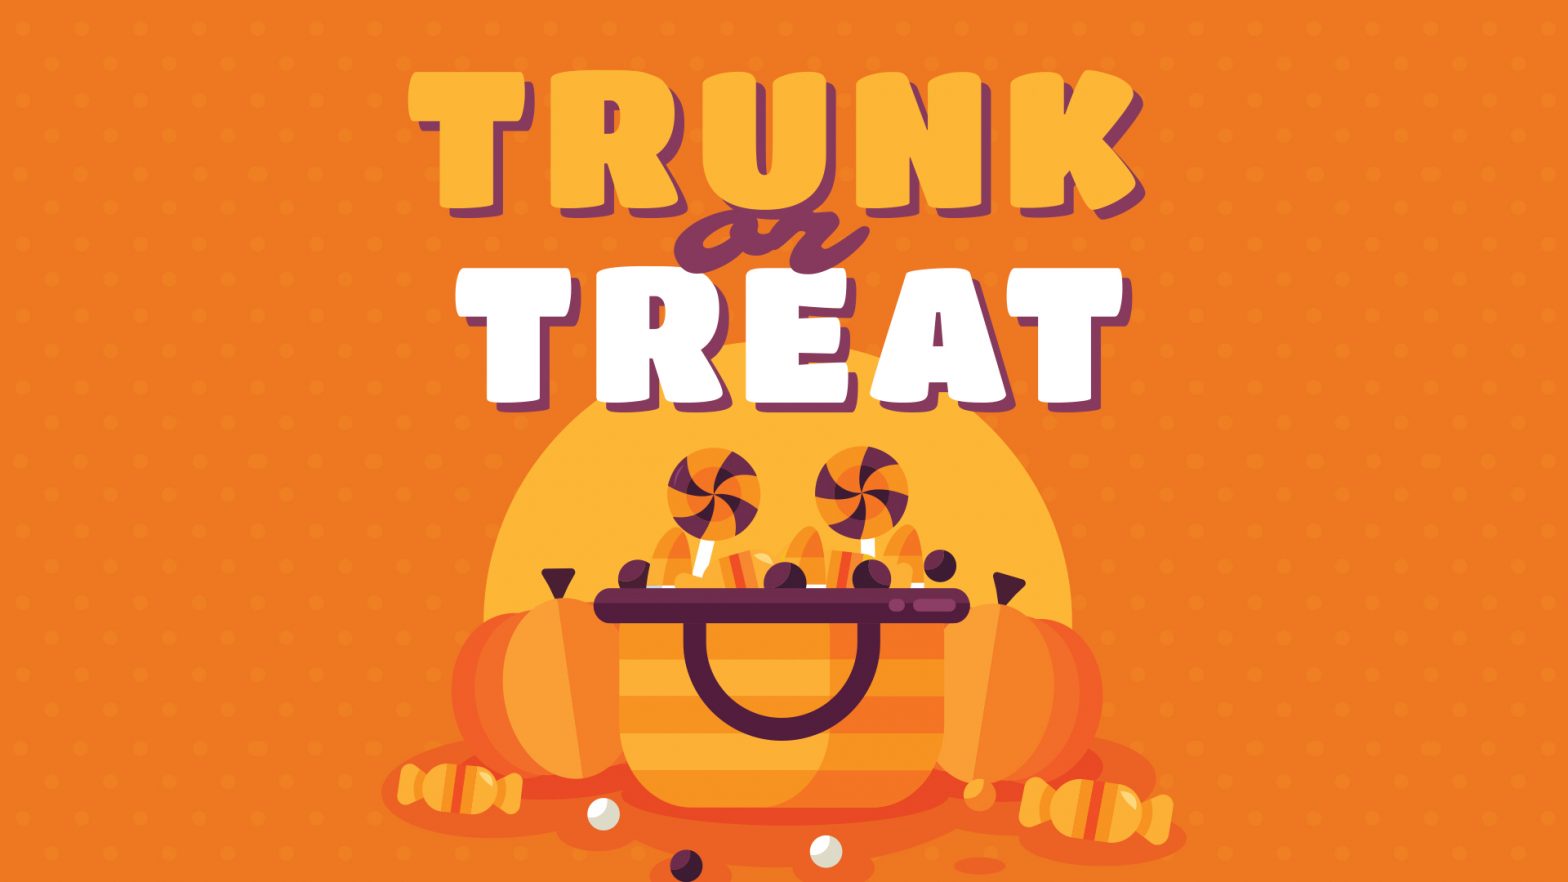 Trunk or Treat image